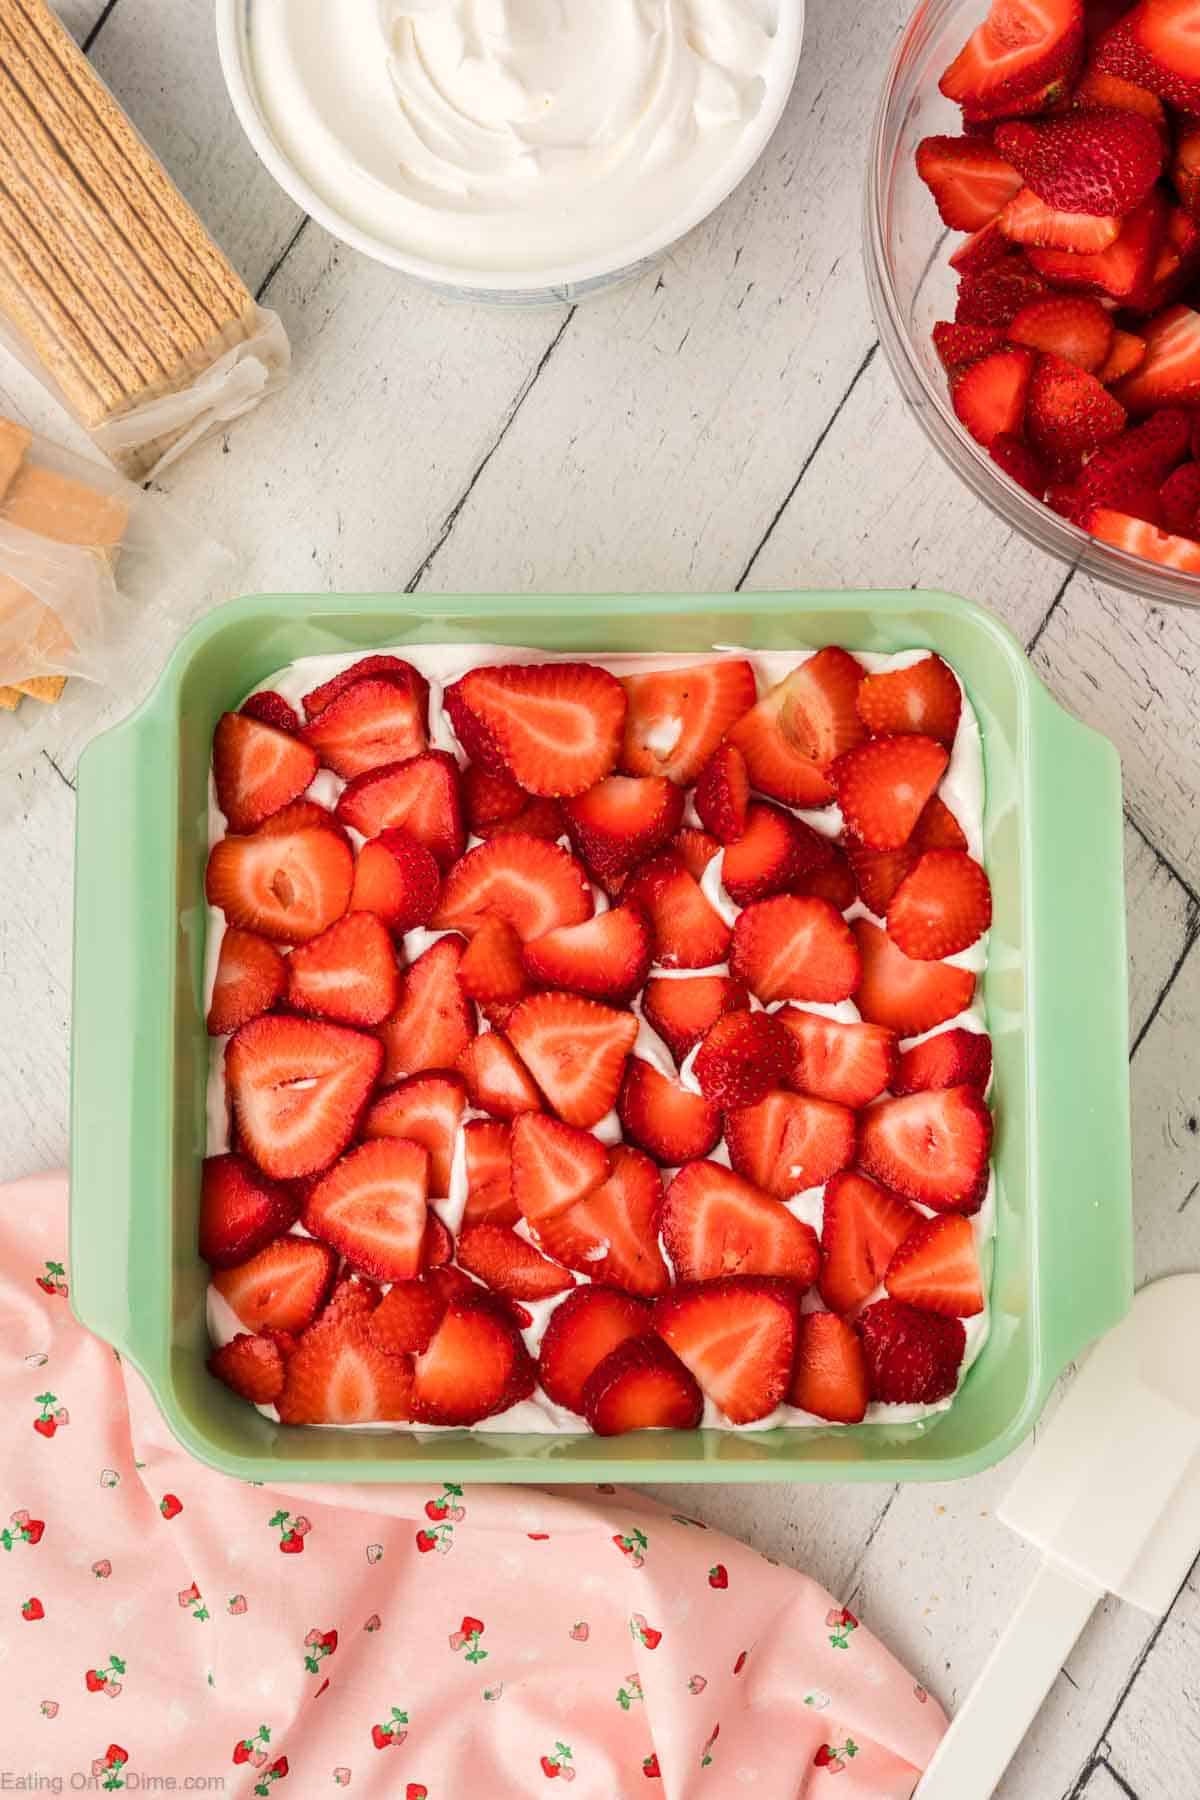 Topping a layer of fresh strawberries in the baking dish